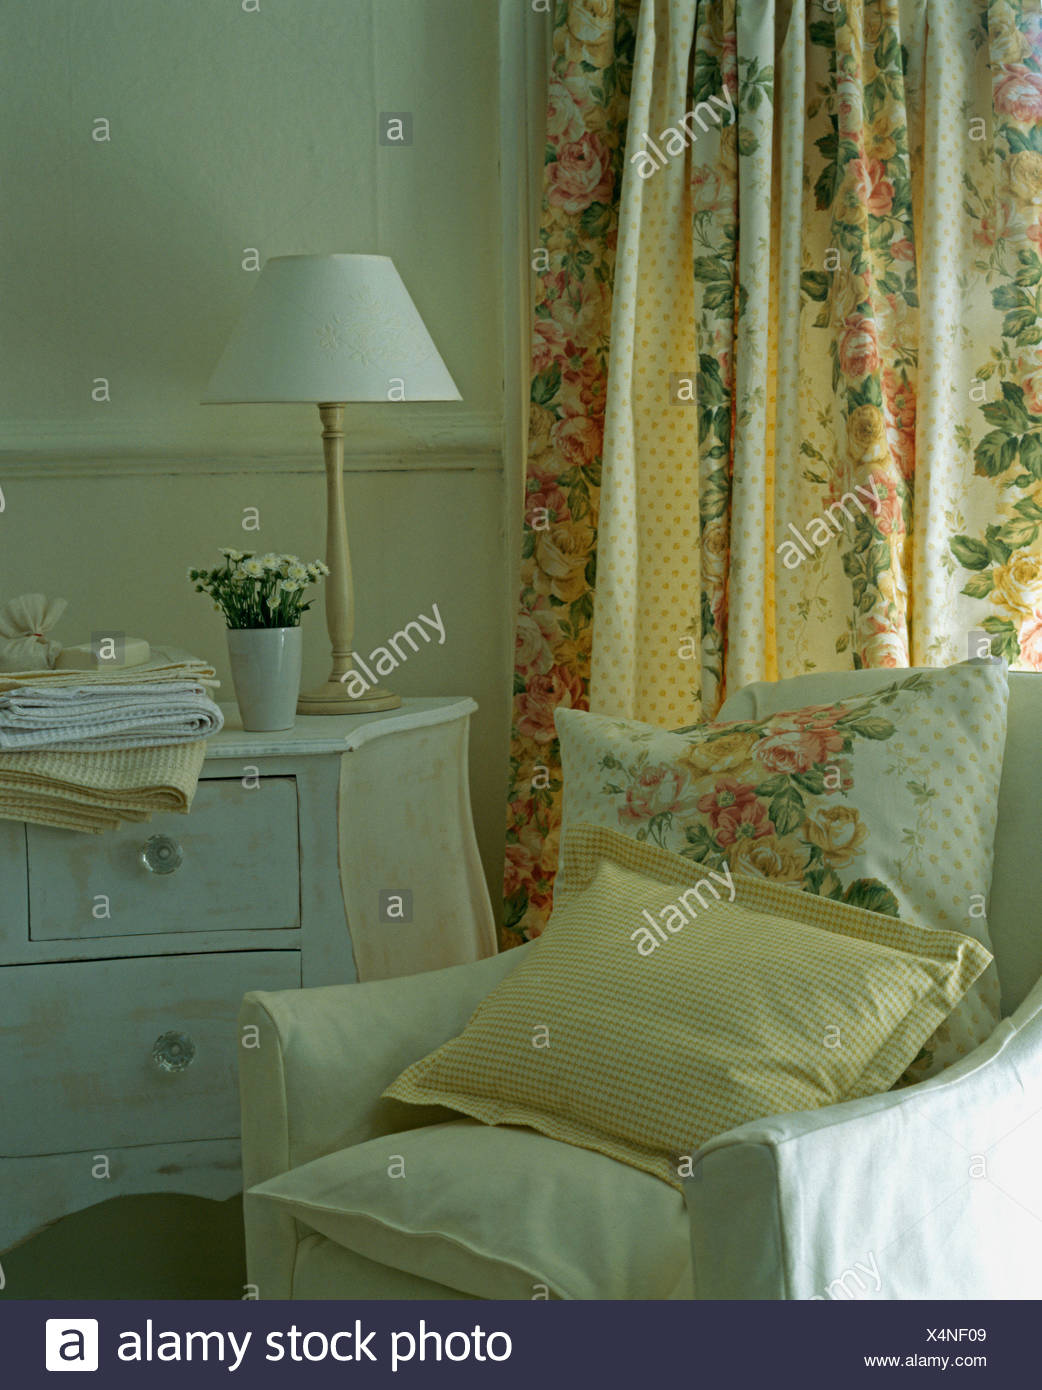 Bedroom With Yellow Checked And Rose Patterned Cushions On